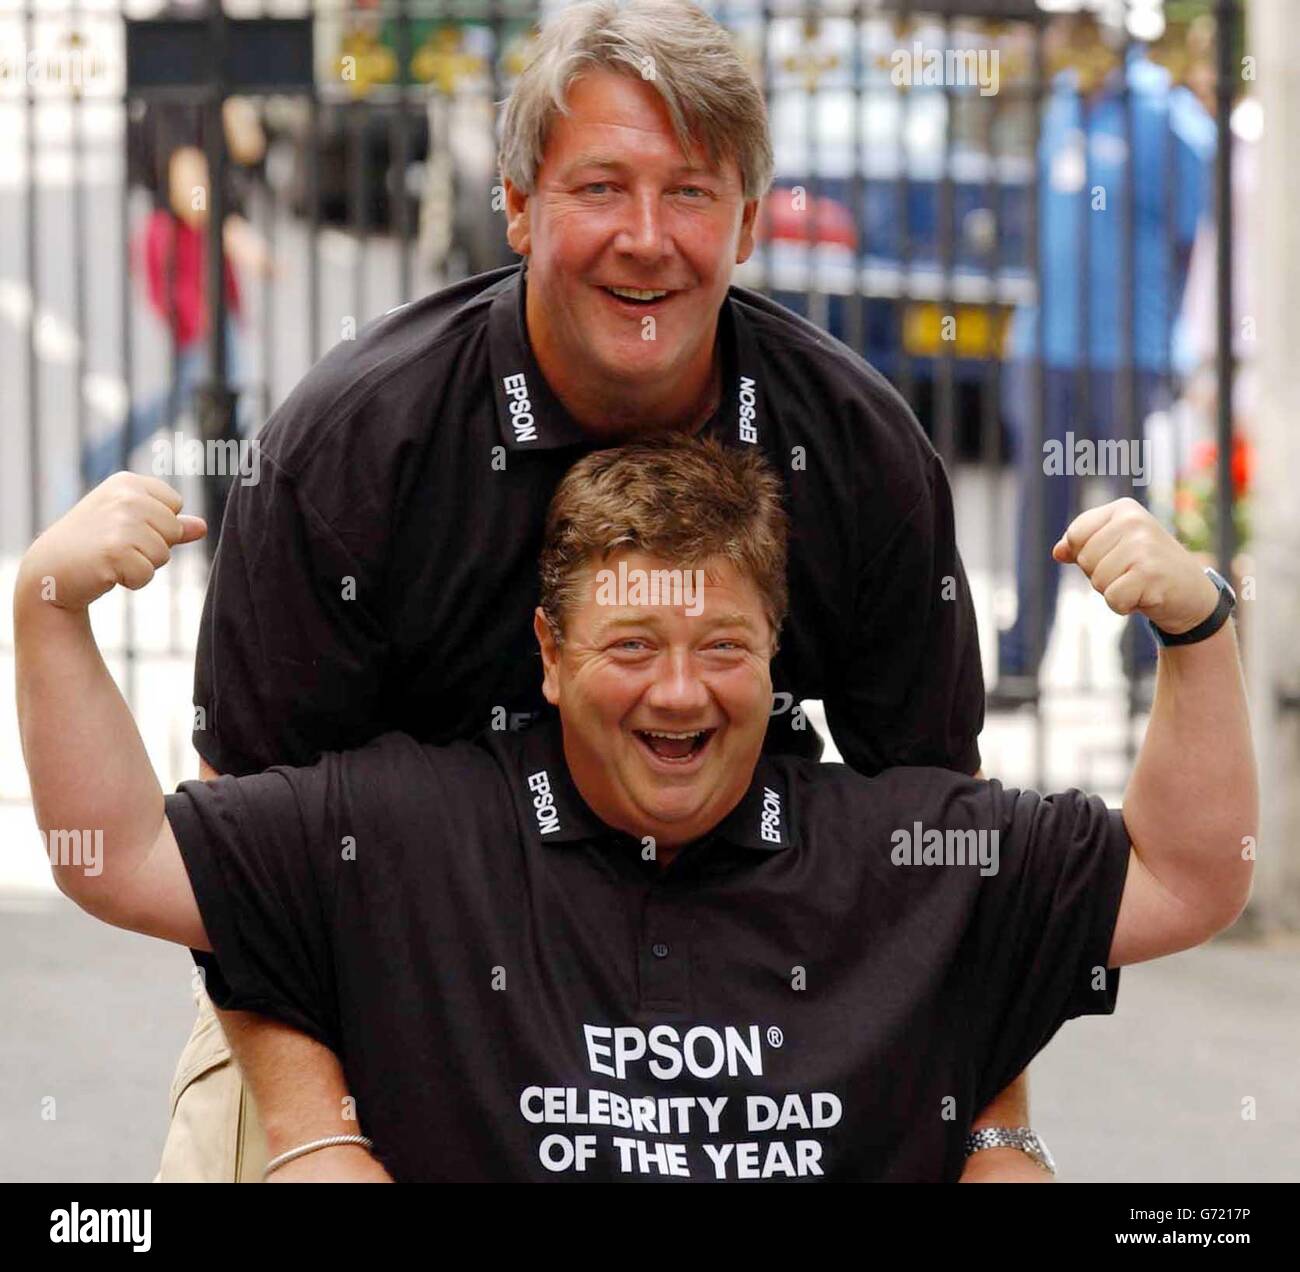 Ground Force presenter Tommy Walsh (left) and Heart FM DJ's Jono Coleman  during a photocall to celebrate their winning the Epsom Celebrity Dad of  the Year 2004, outside the Grovesnor House Hotel